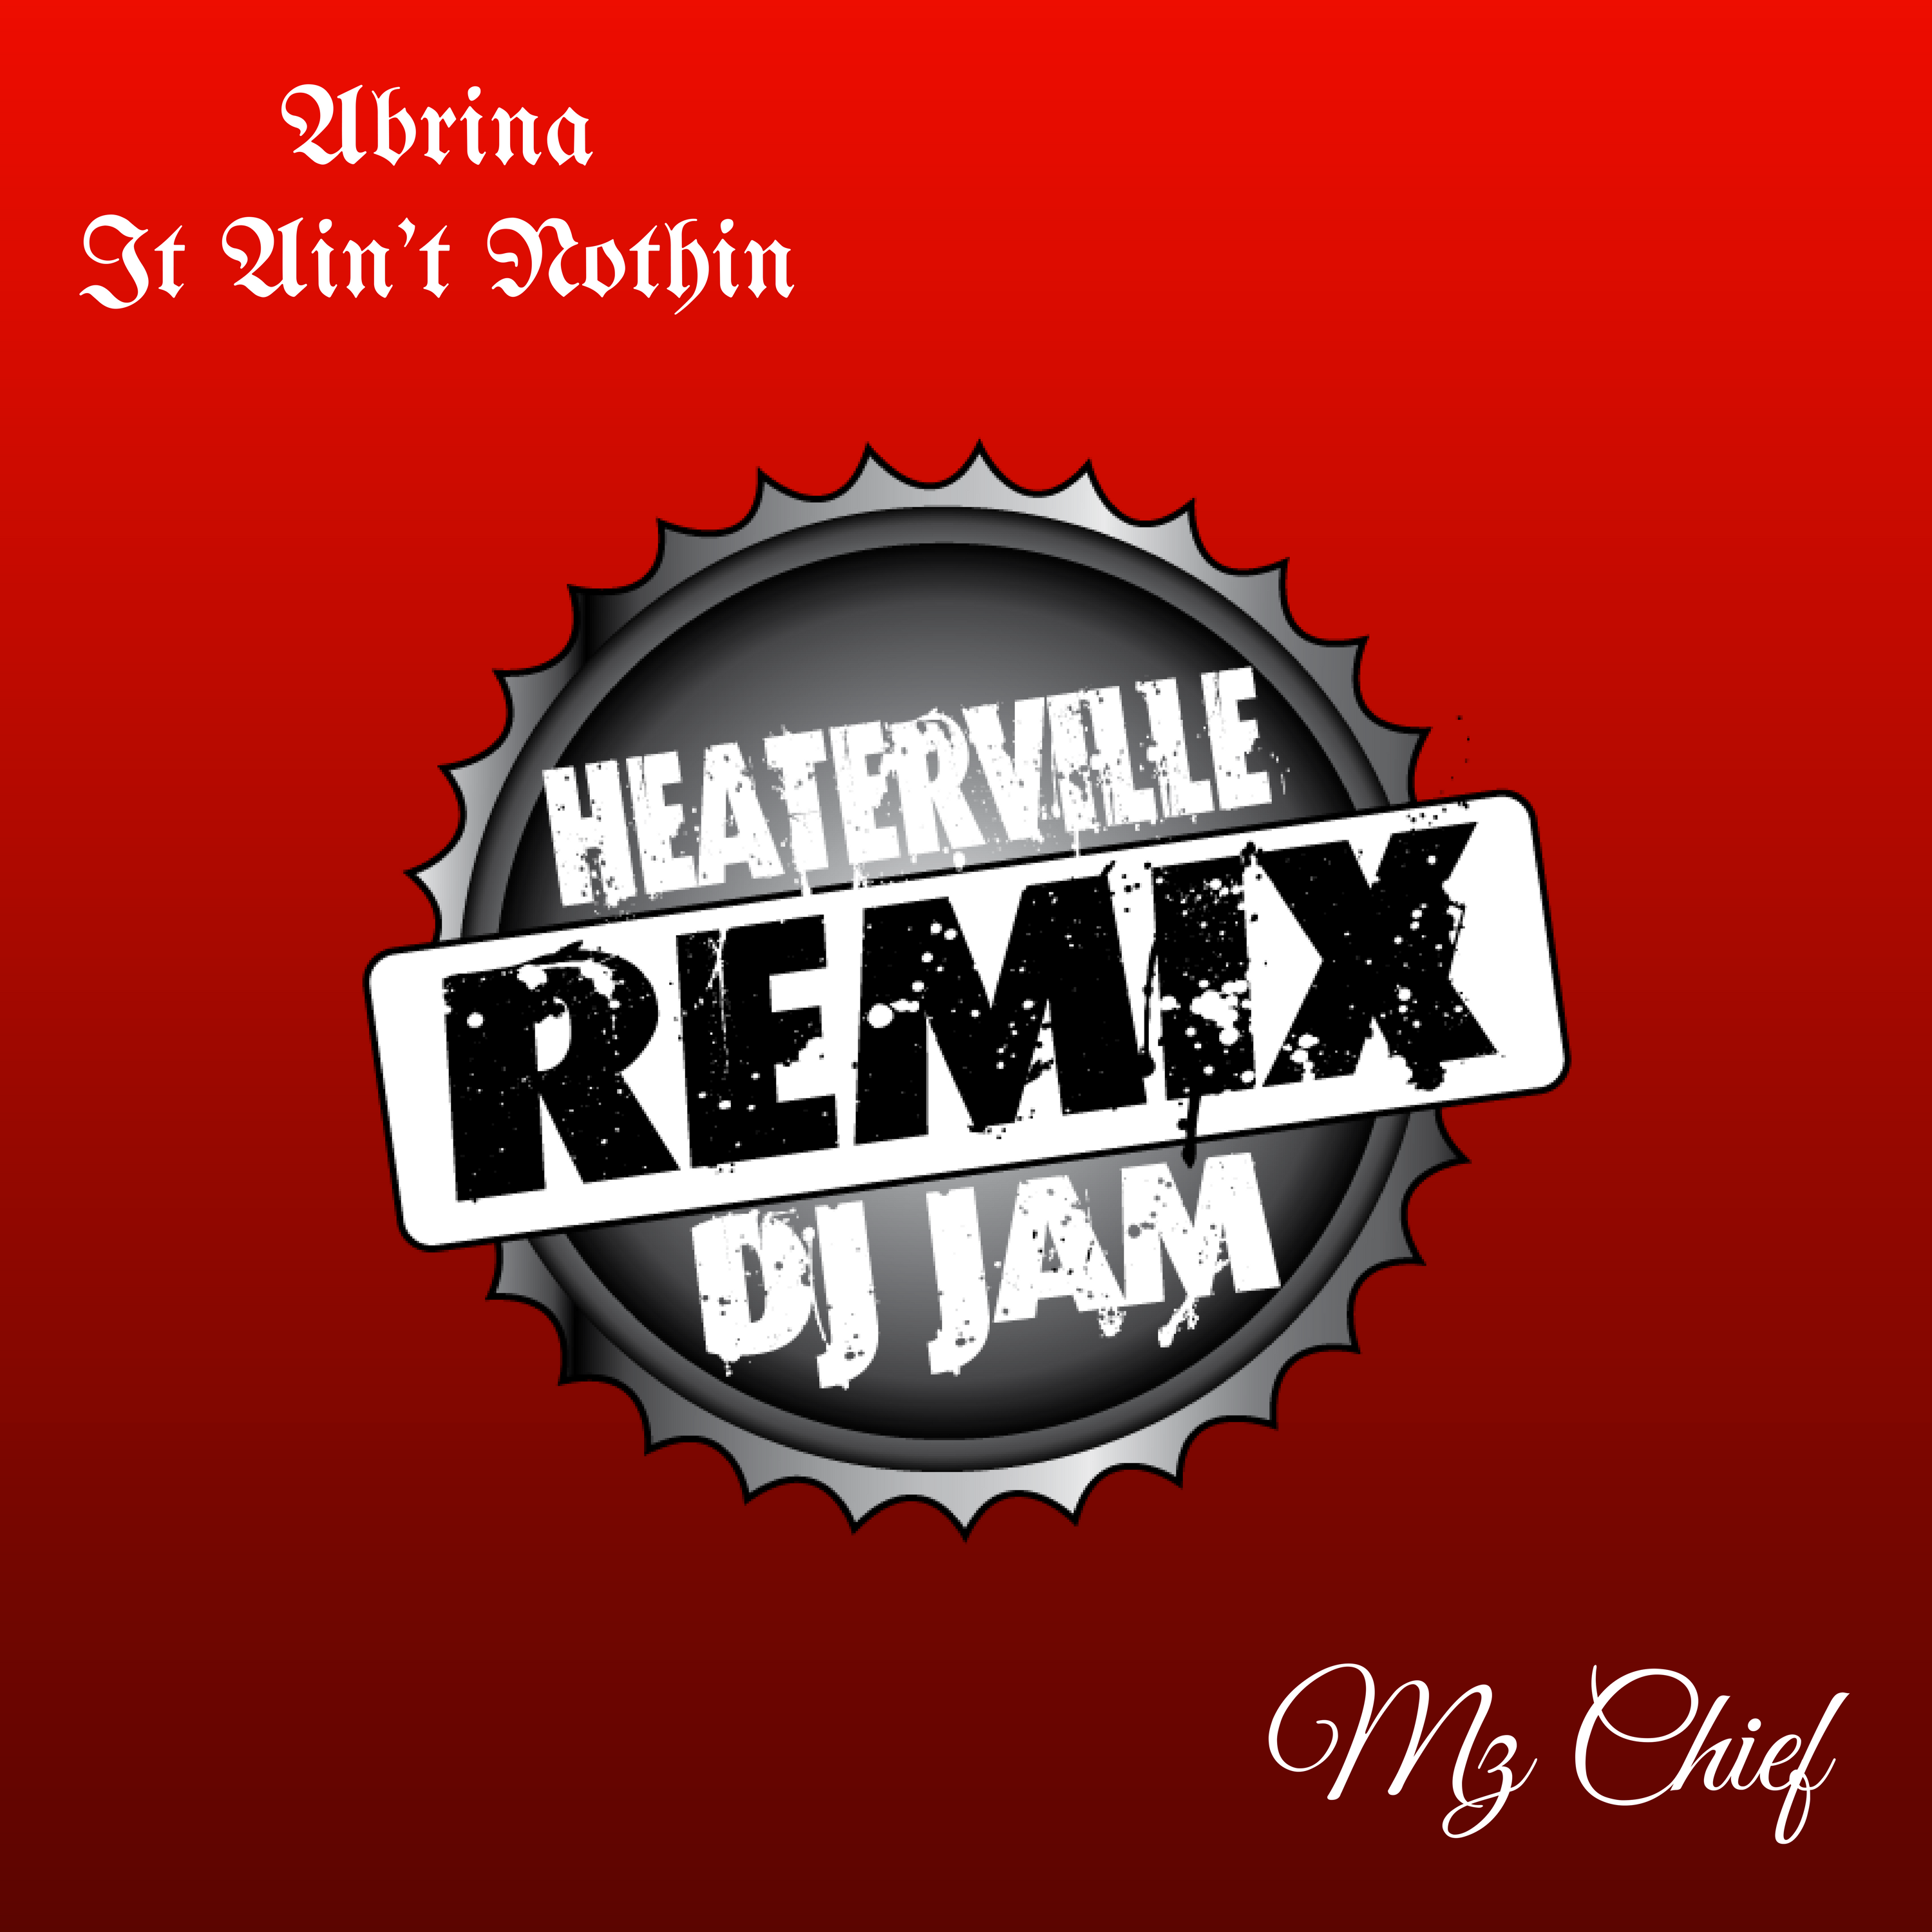 Abrina - It Ain't Nothin (REMIX) feat Mz Chief prod by Dj Jam and Heaterville